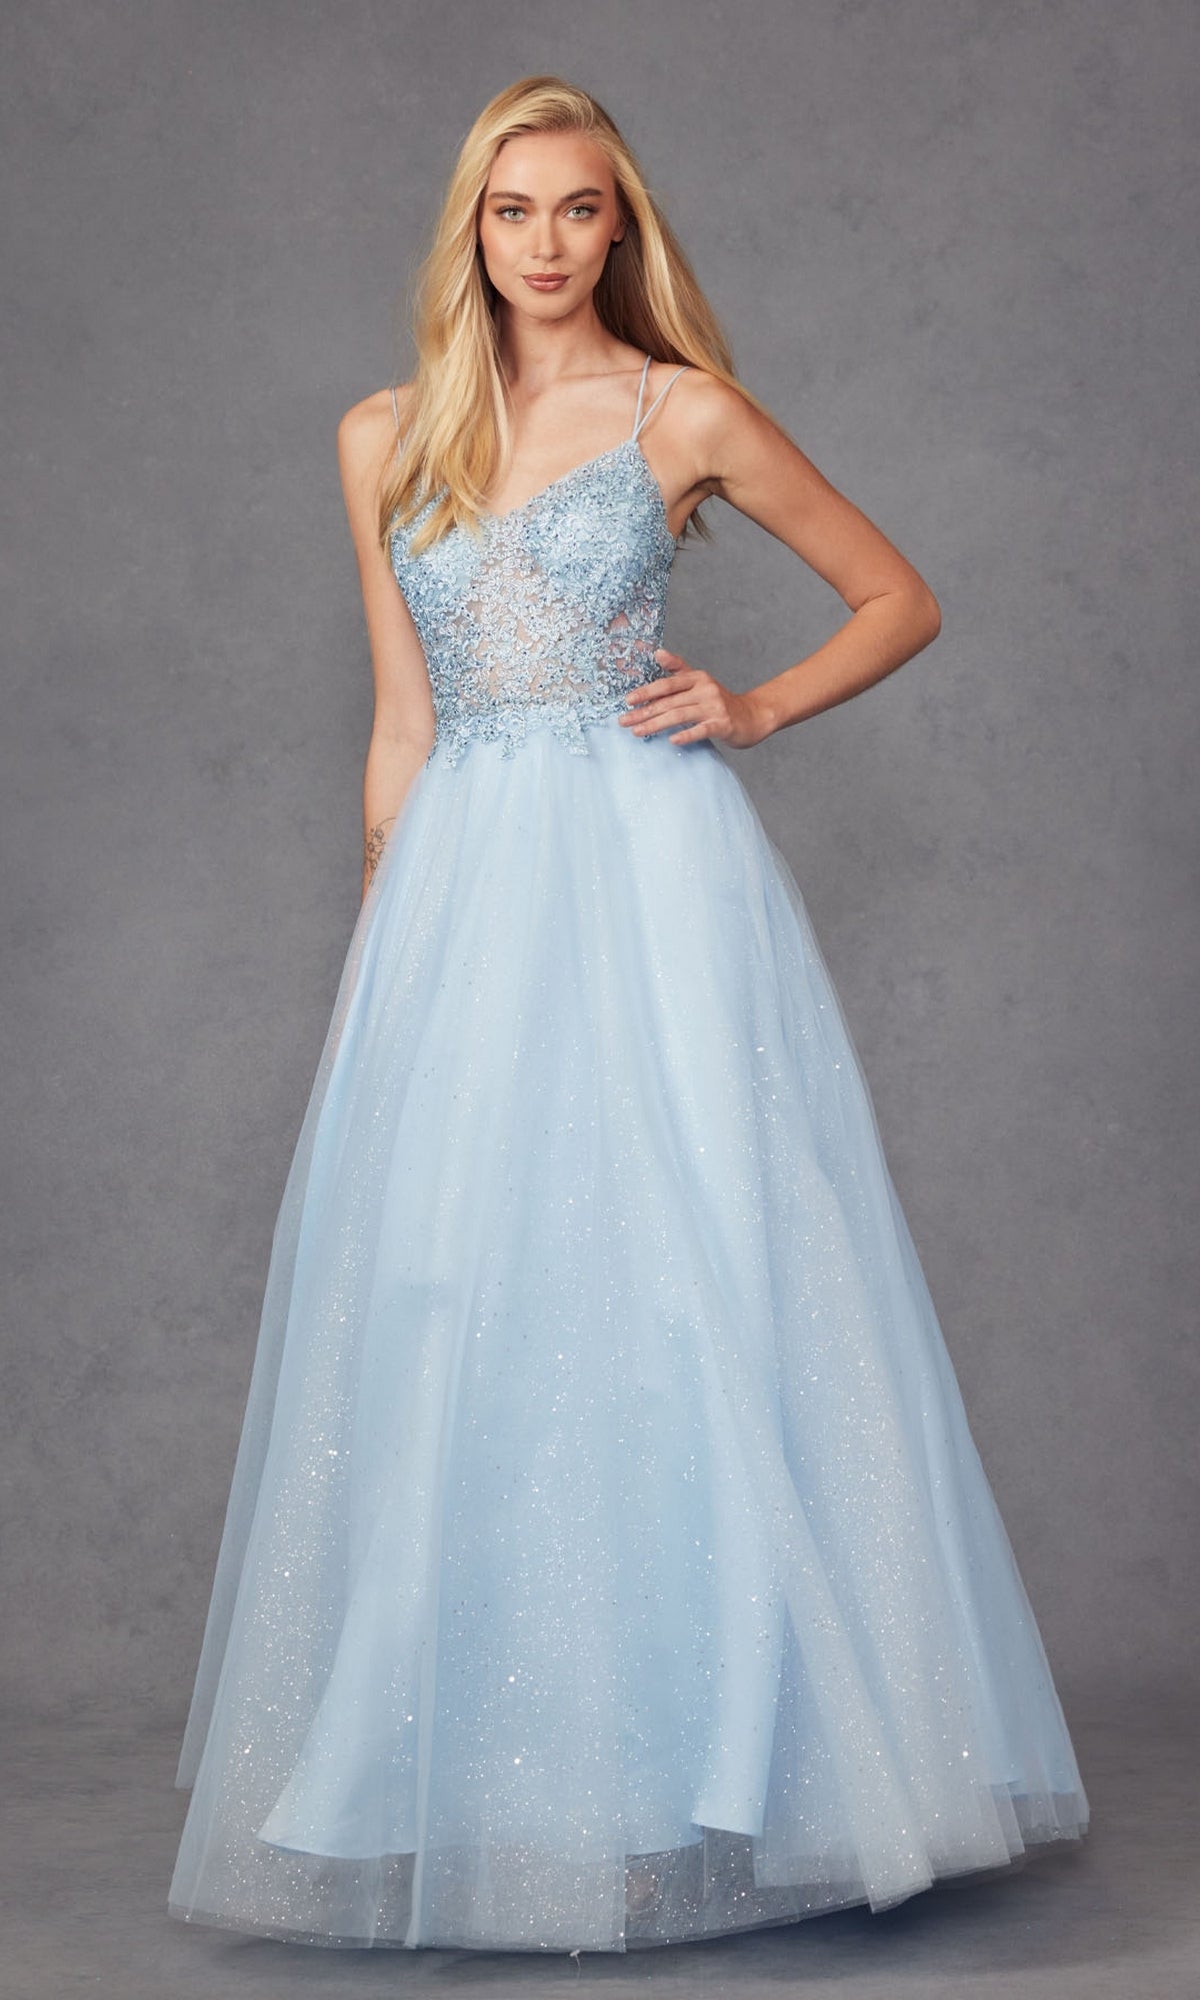 Glitter-Tulle Long Corset-Back Prom Ball Gown 268